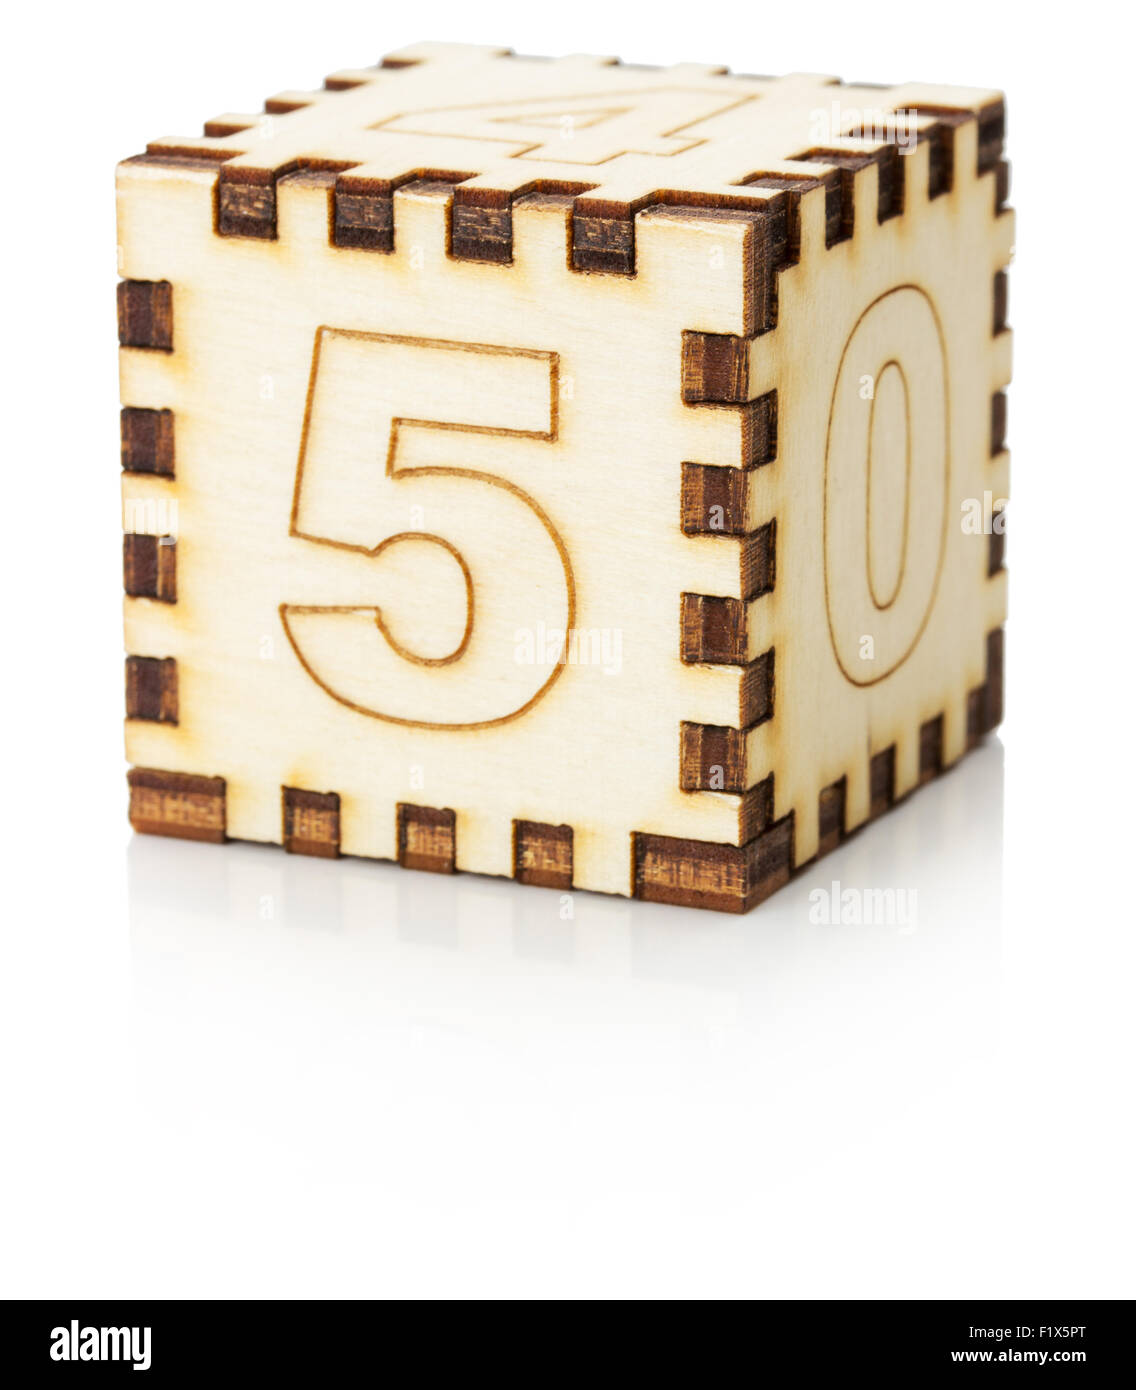 wooden toy cube isolated on the white background. Stock Photo